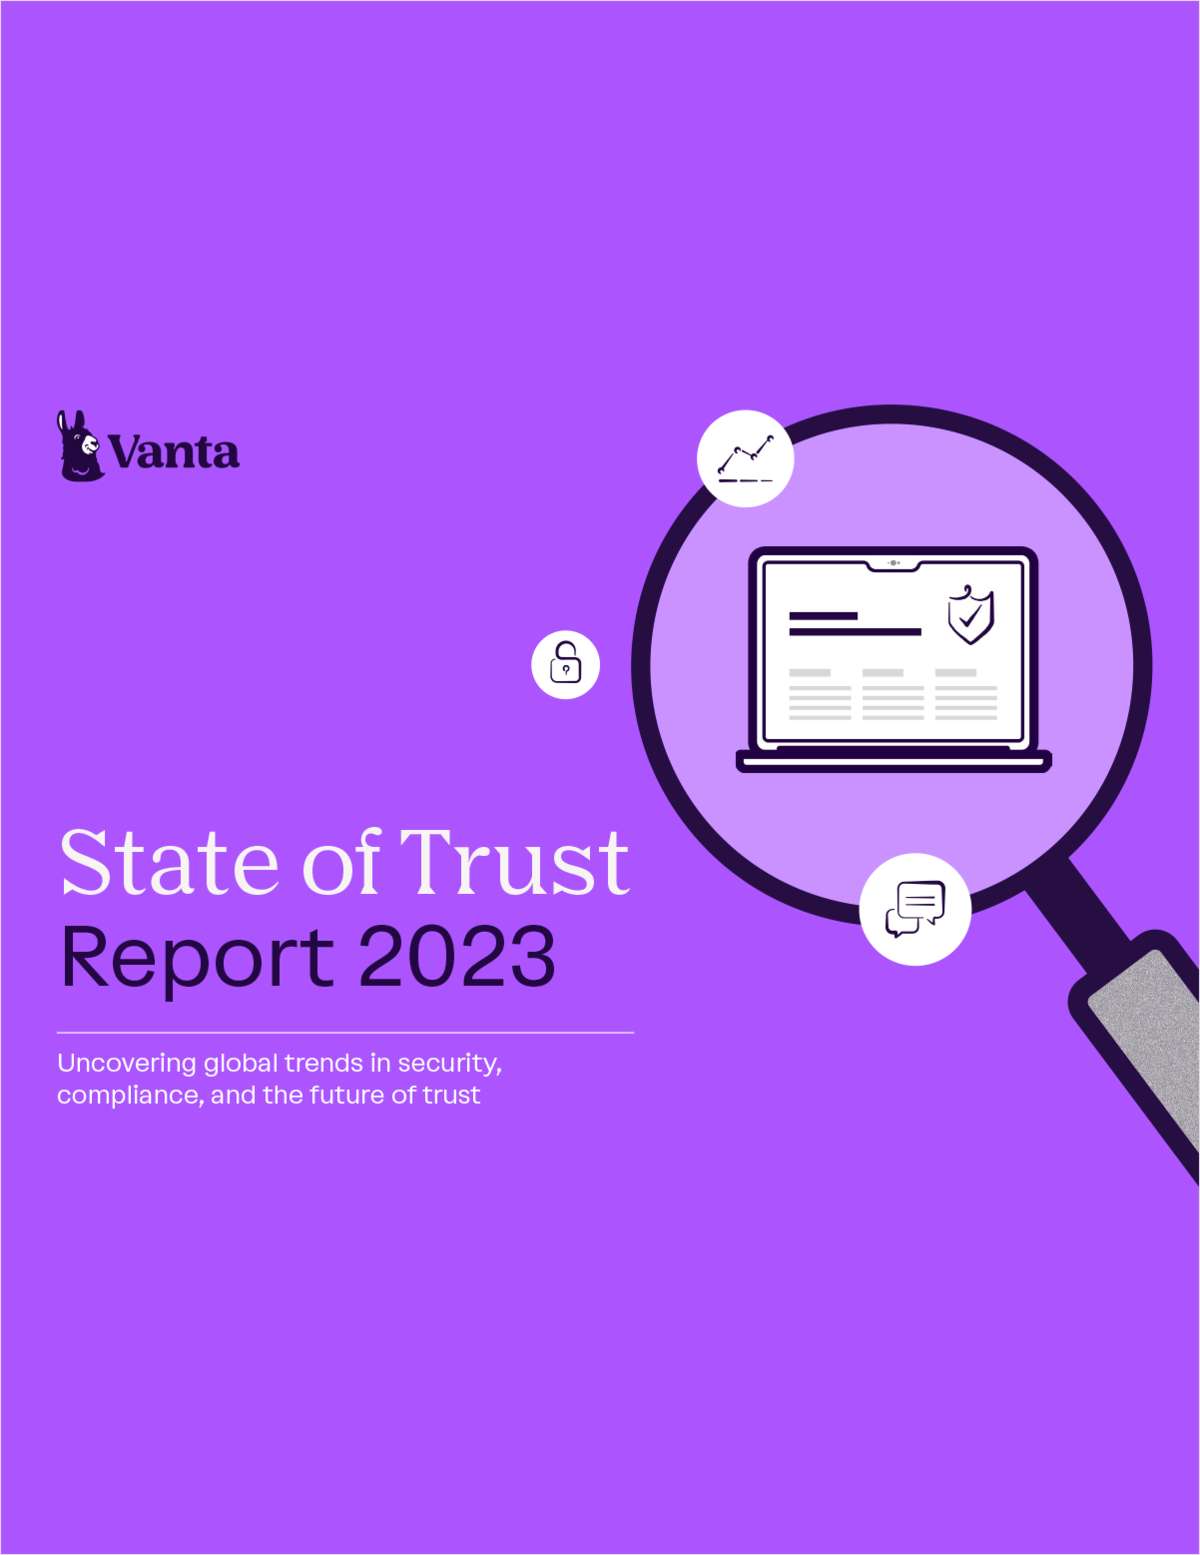 The State of Trust Report 2023